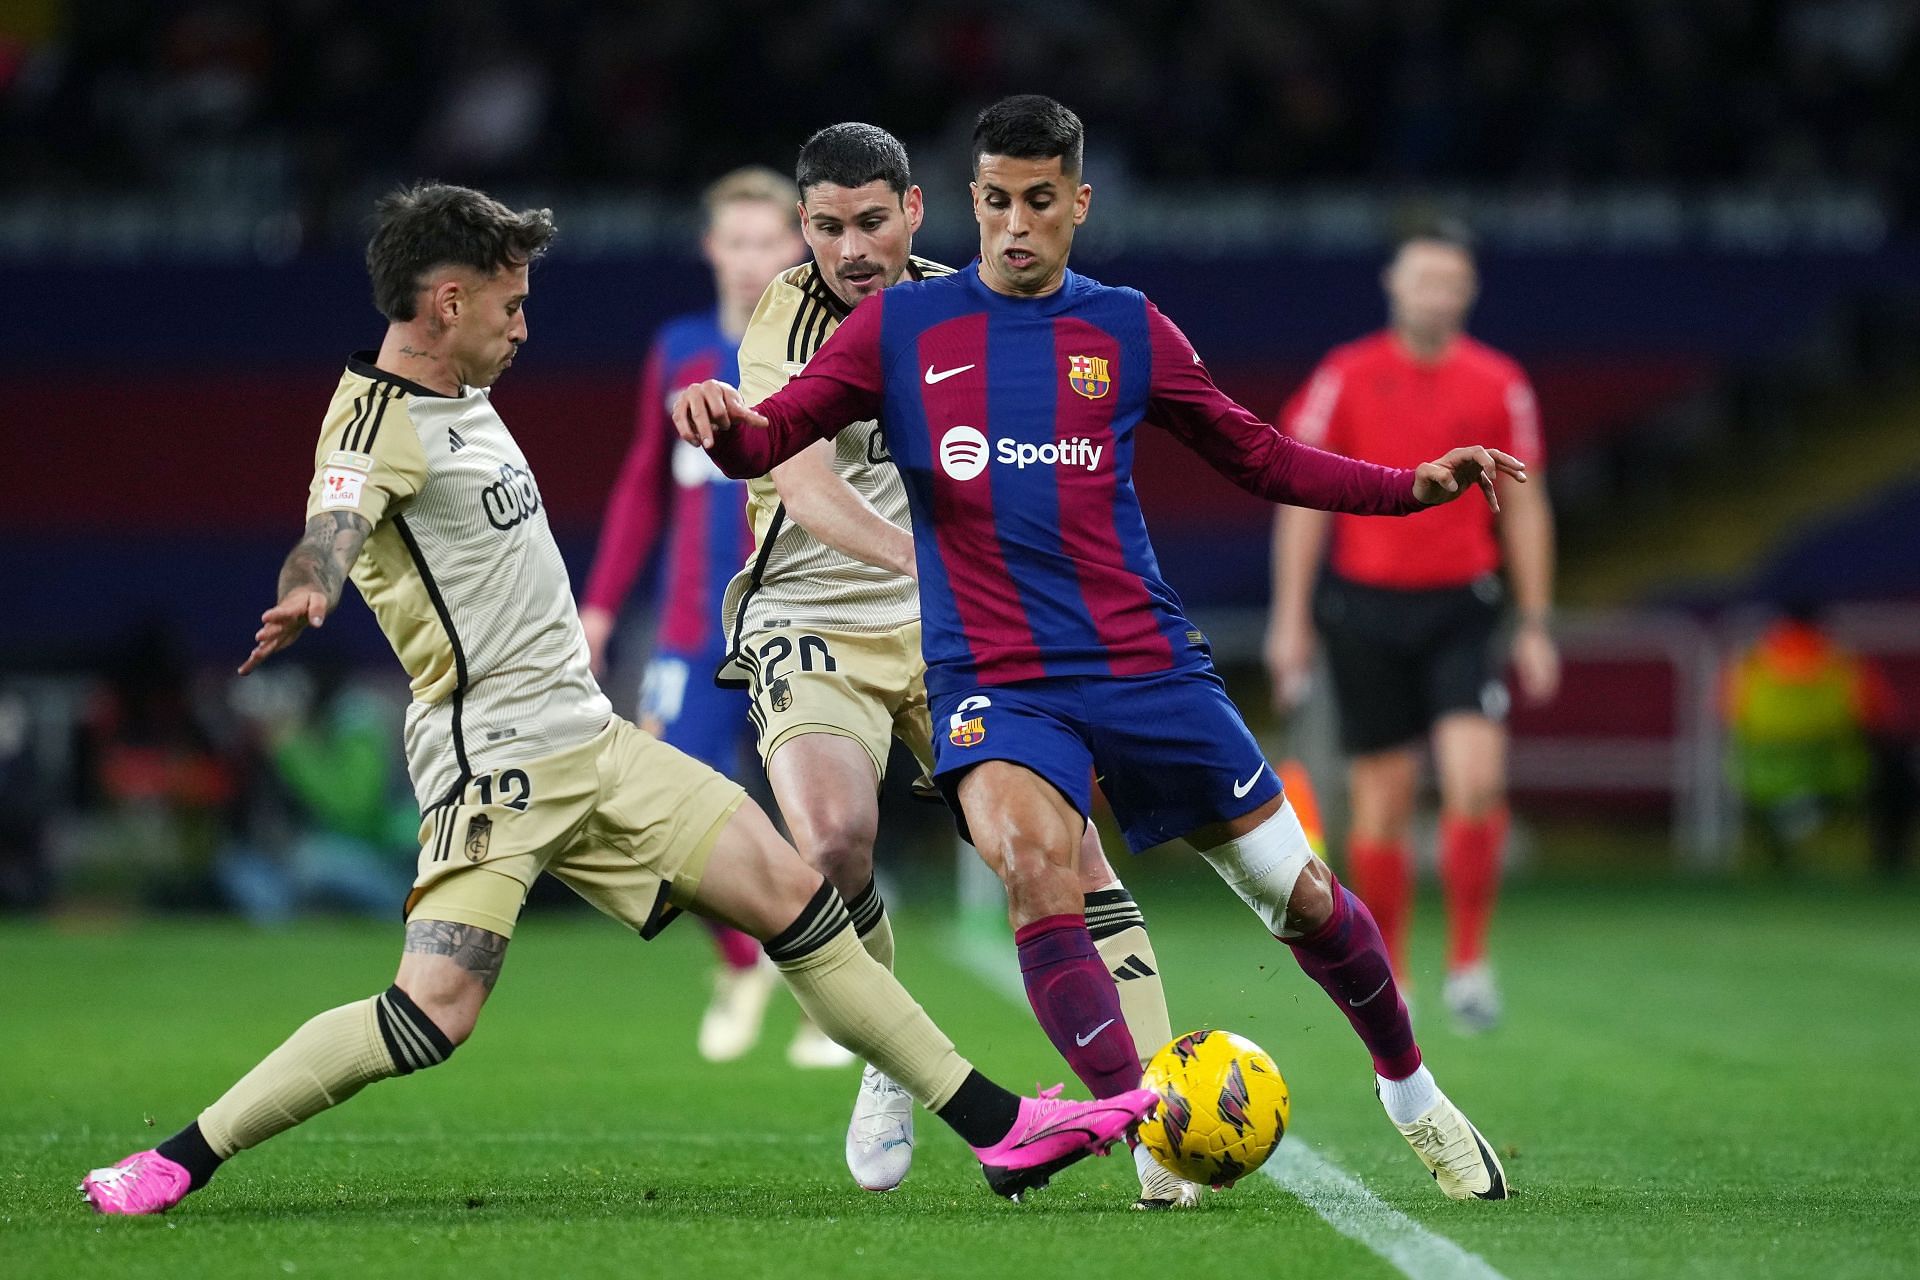 Joao Cancelo has hit the ground running at the Camp Nou.